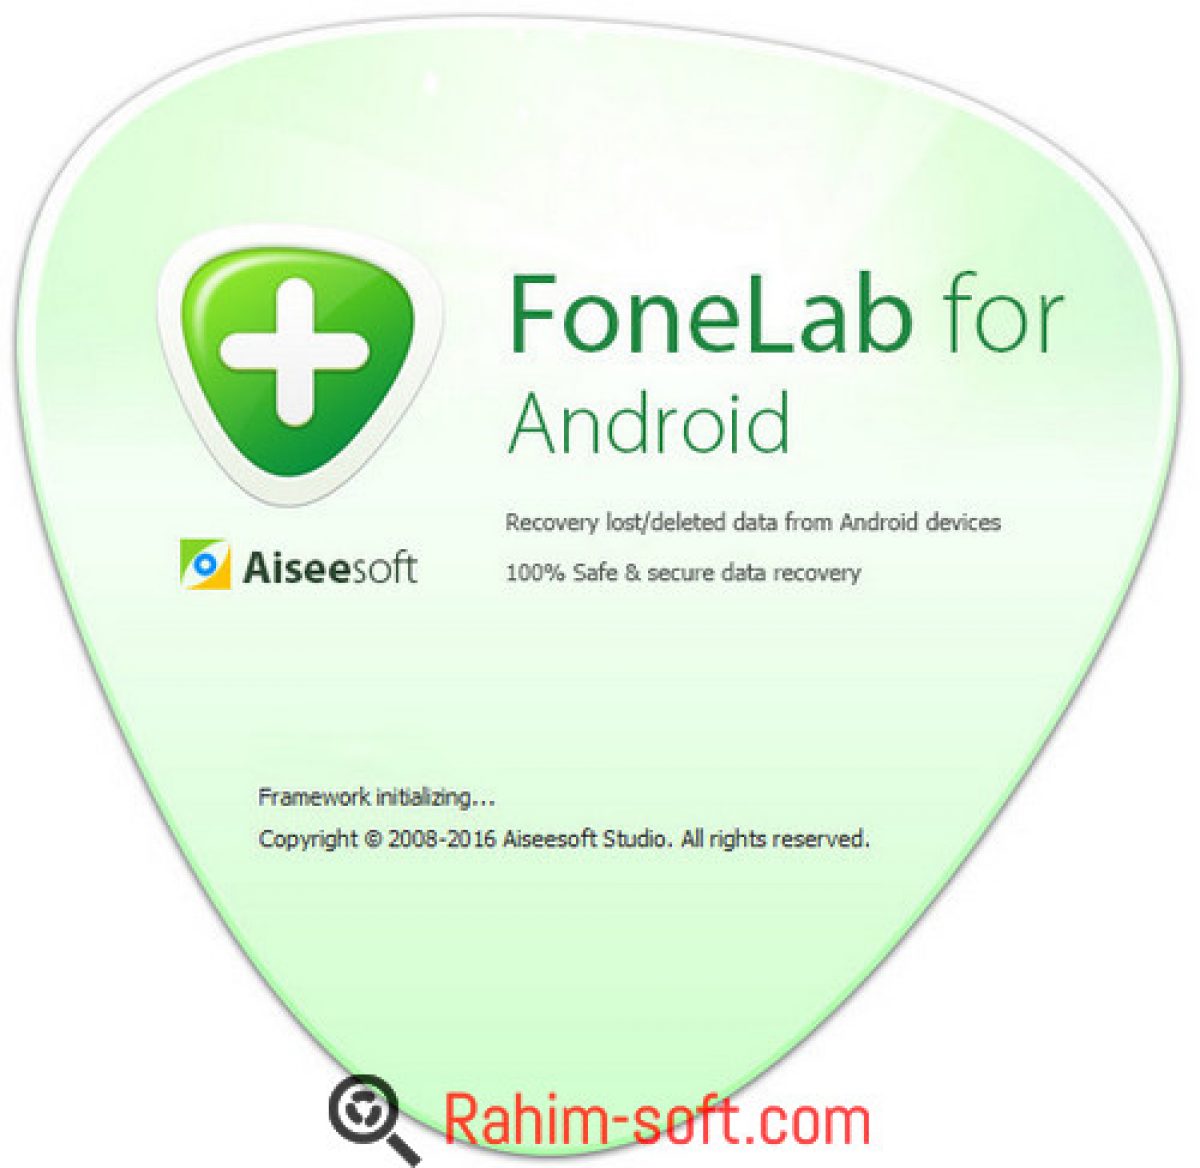 fonelab for android